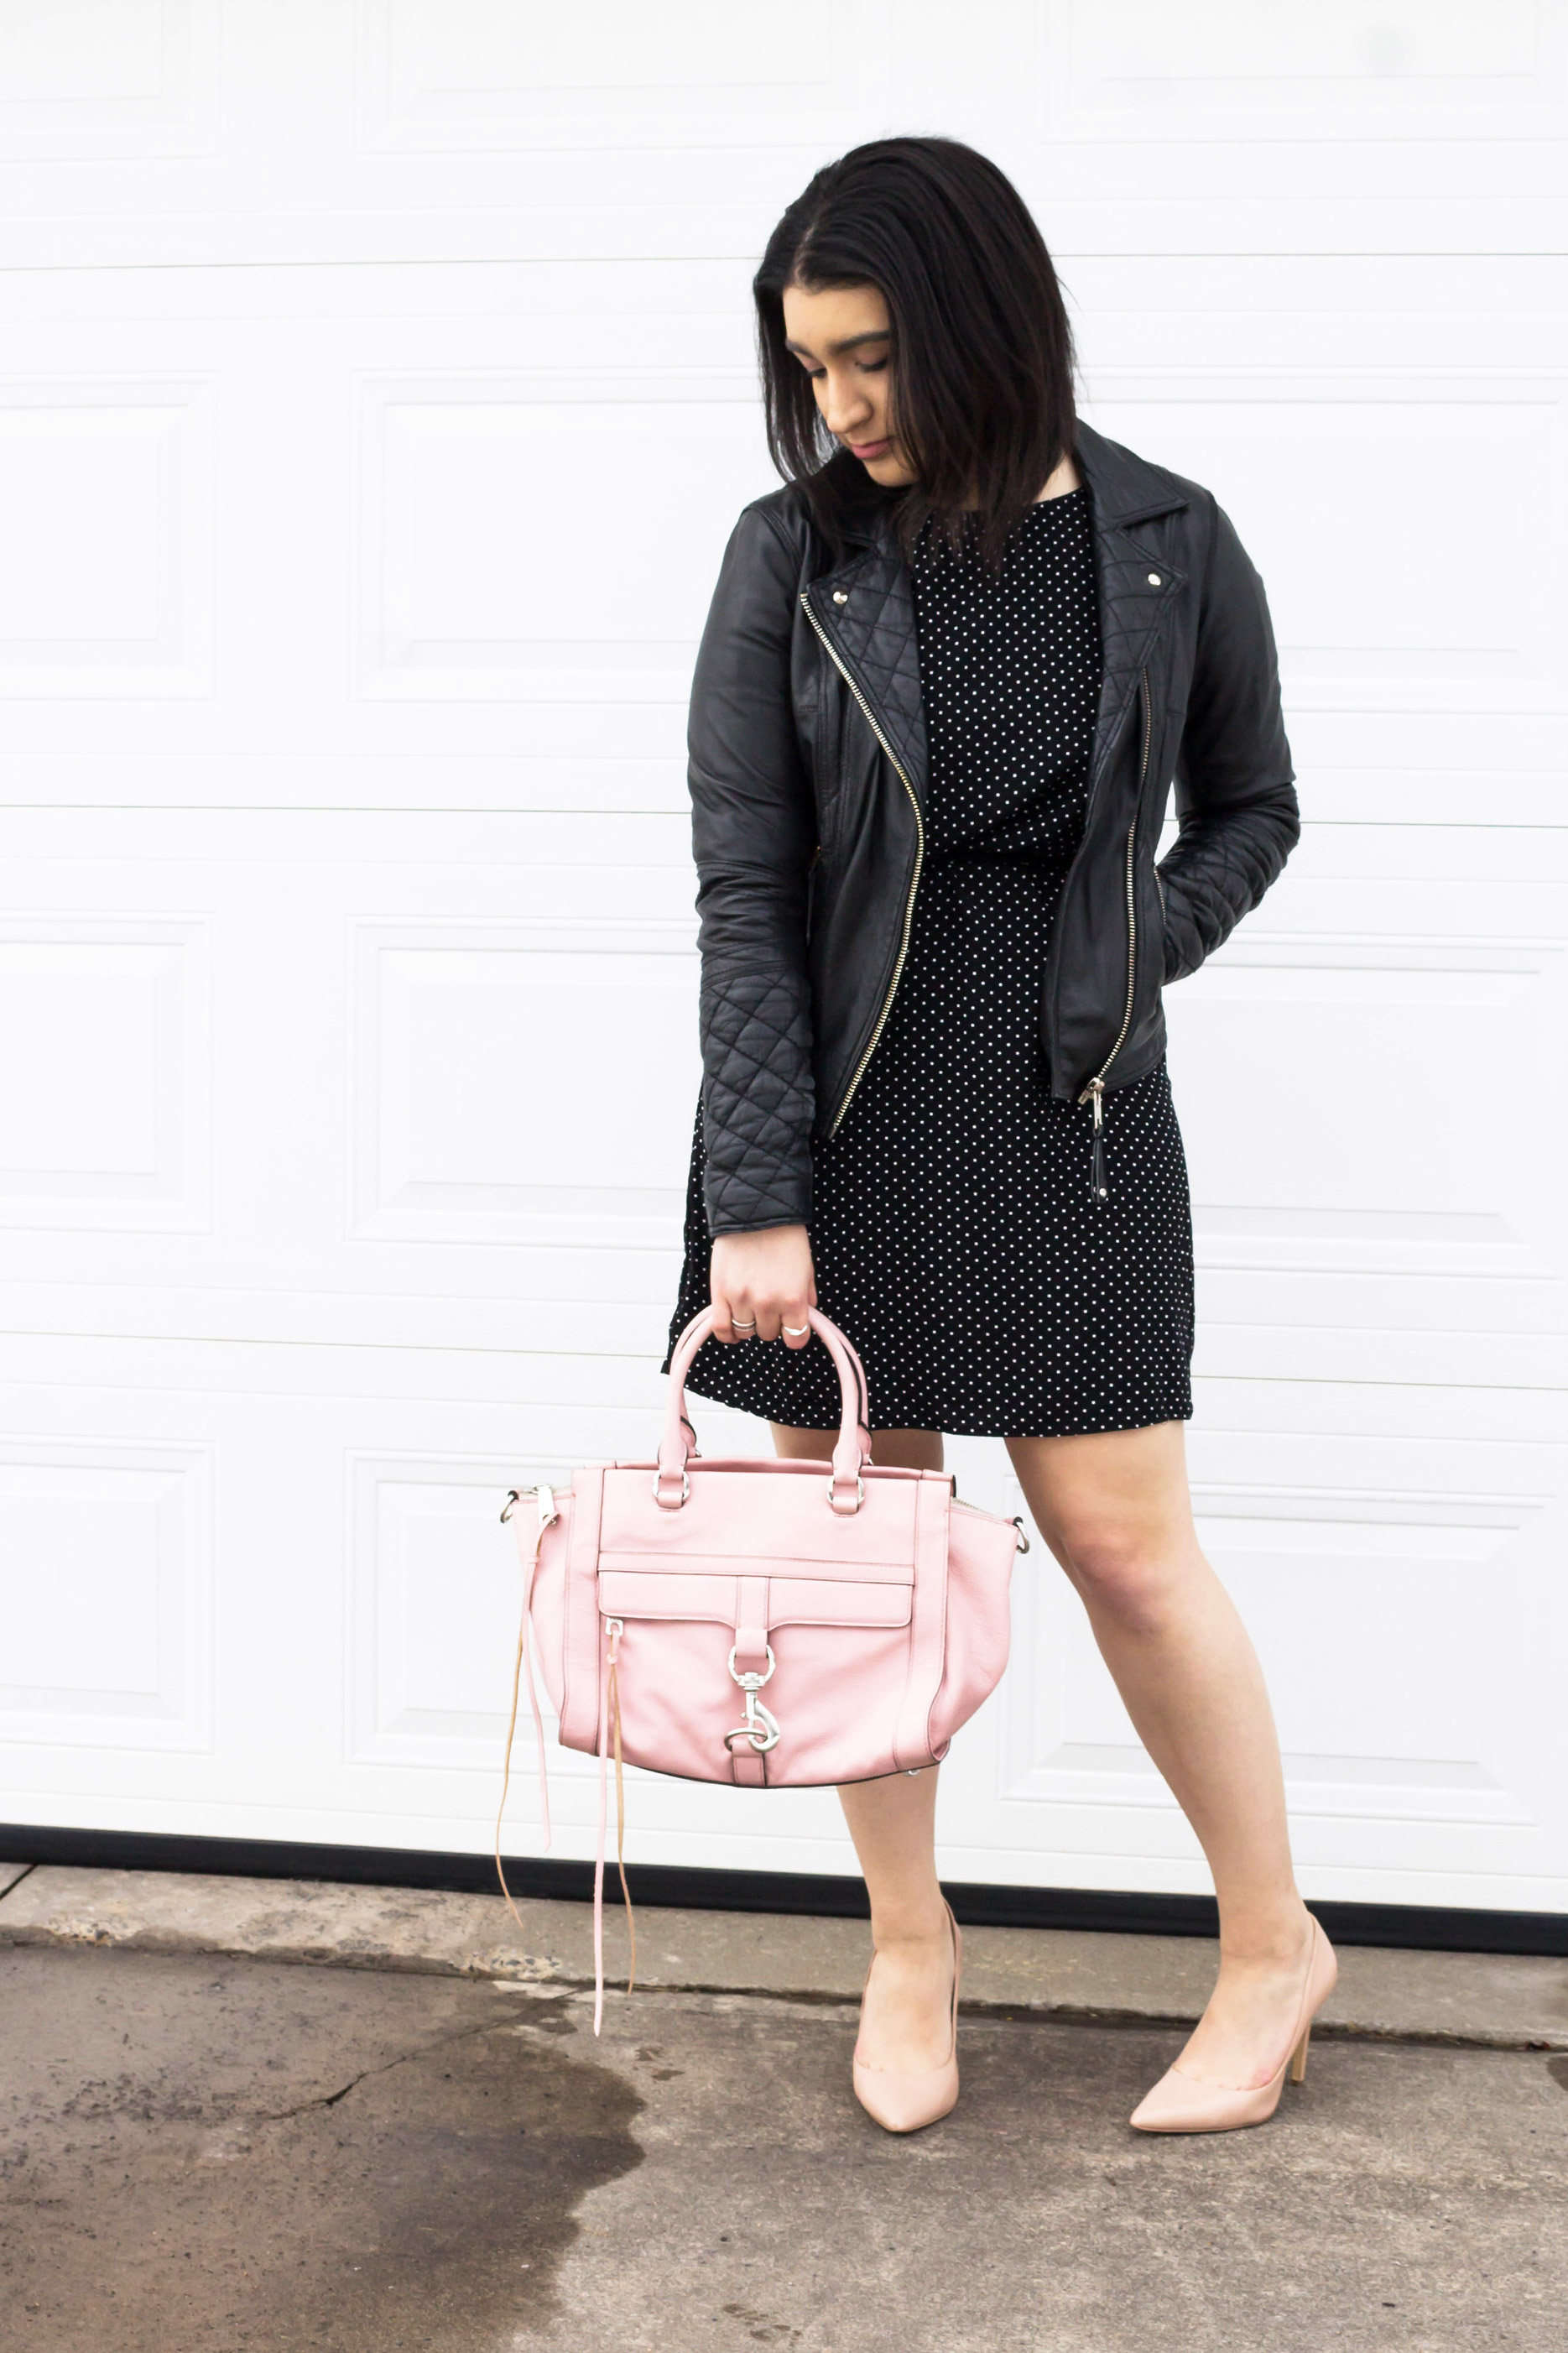 Look for Less: Leather Jacket and Polka Dot Dress 